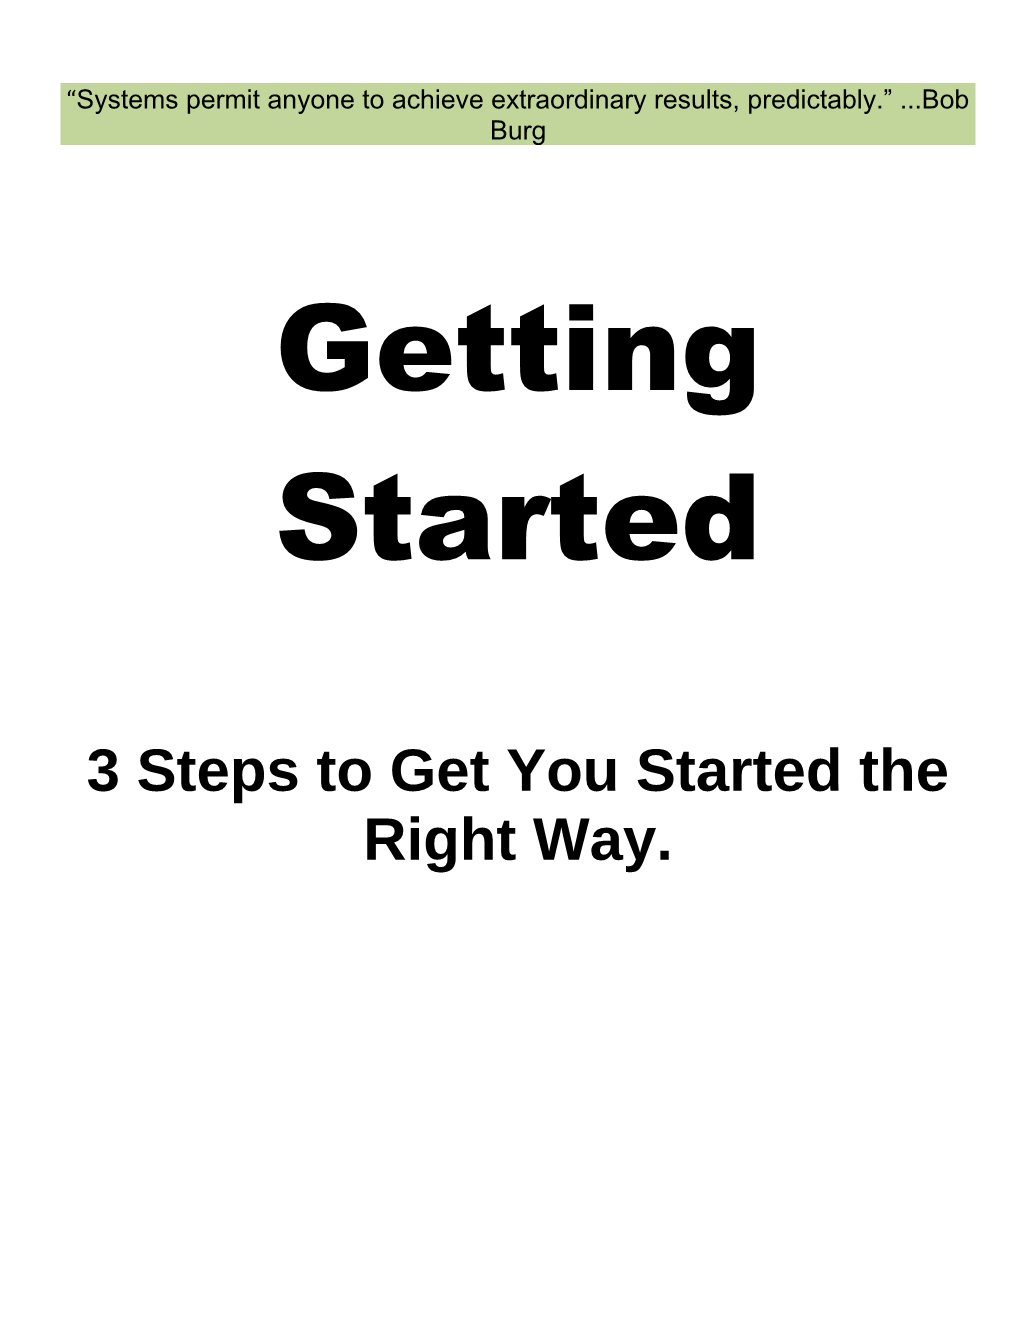 3 Steps to Get You Started the Right Way